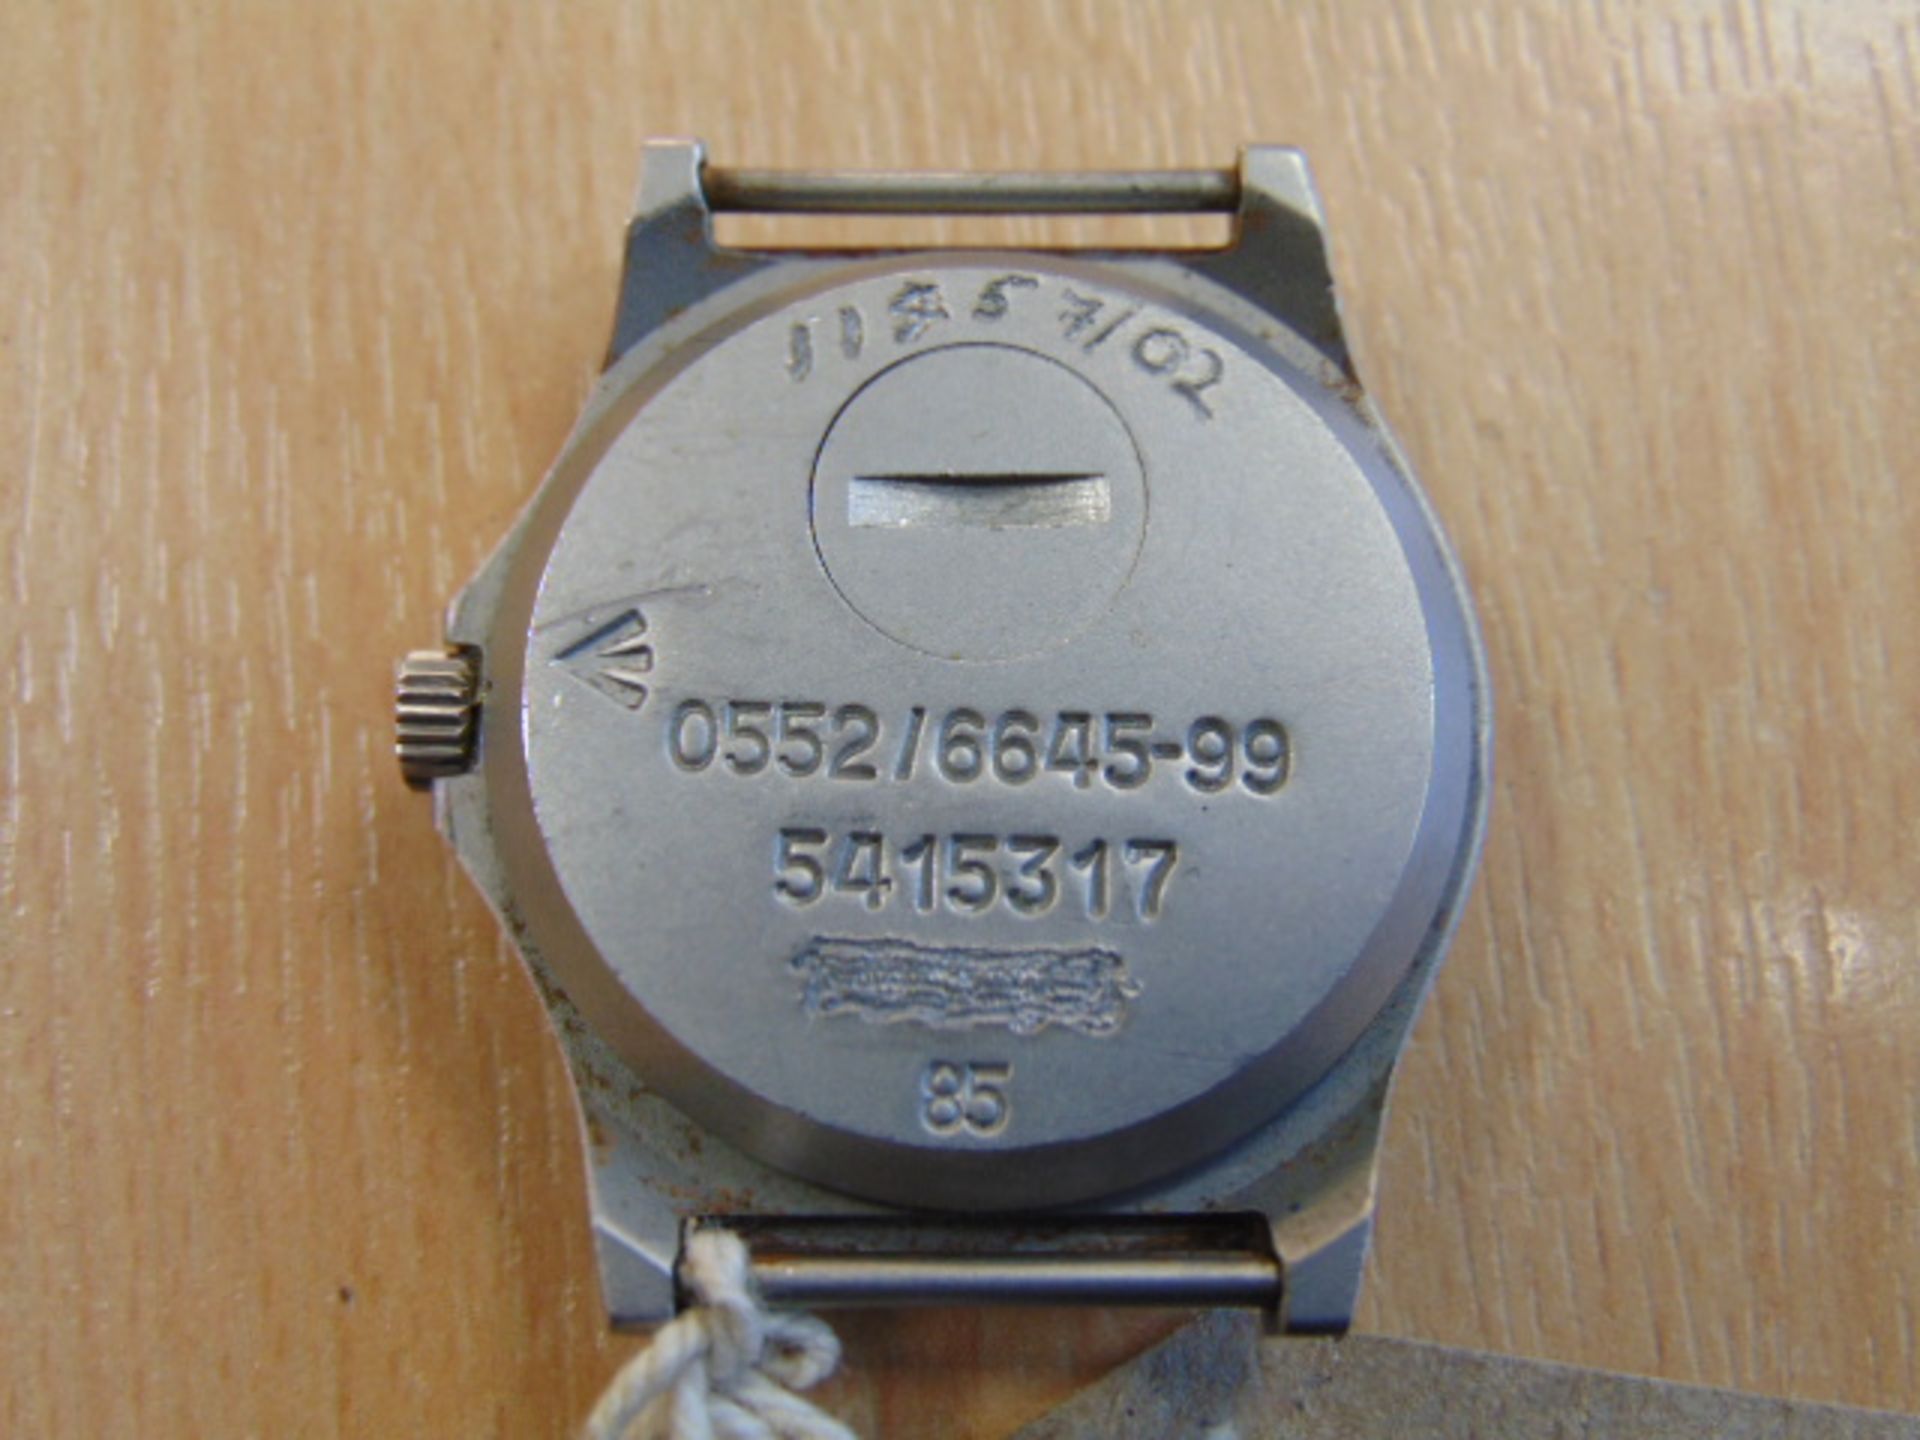 V, RARE CWC 0552 ROYAL MARINES ISSUE FAT BOY CASE SERVICE WATCH DATED 1985 - Image 2 of 4